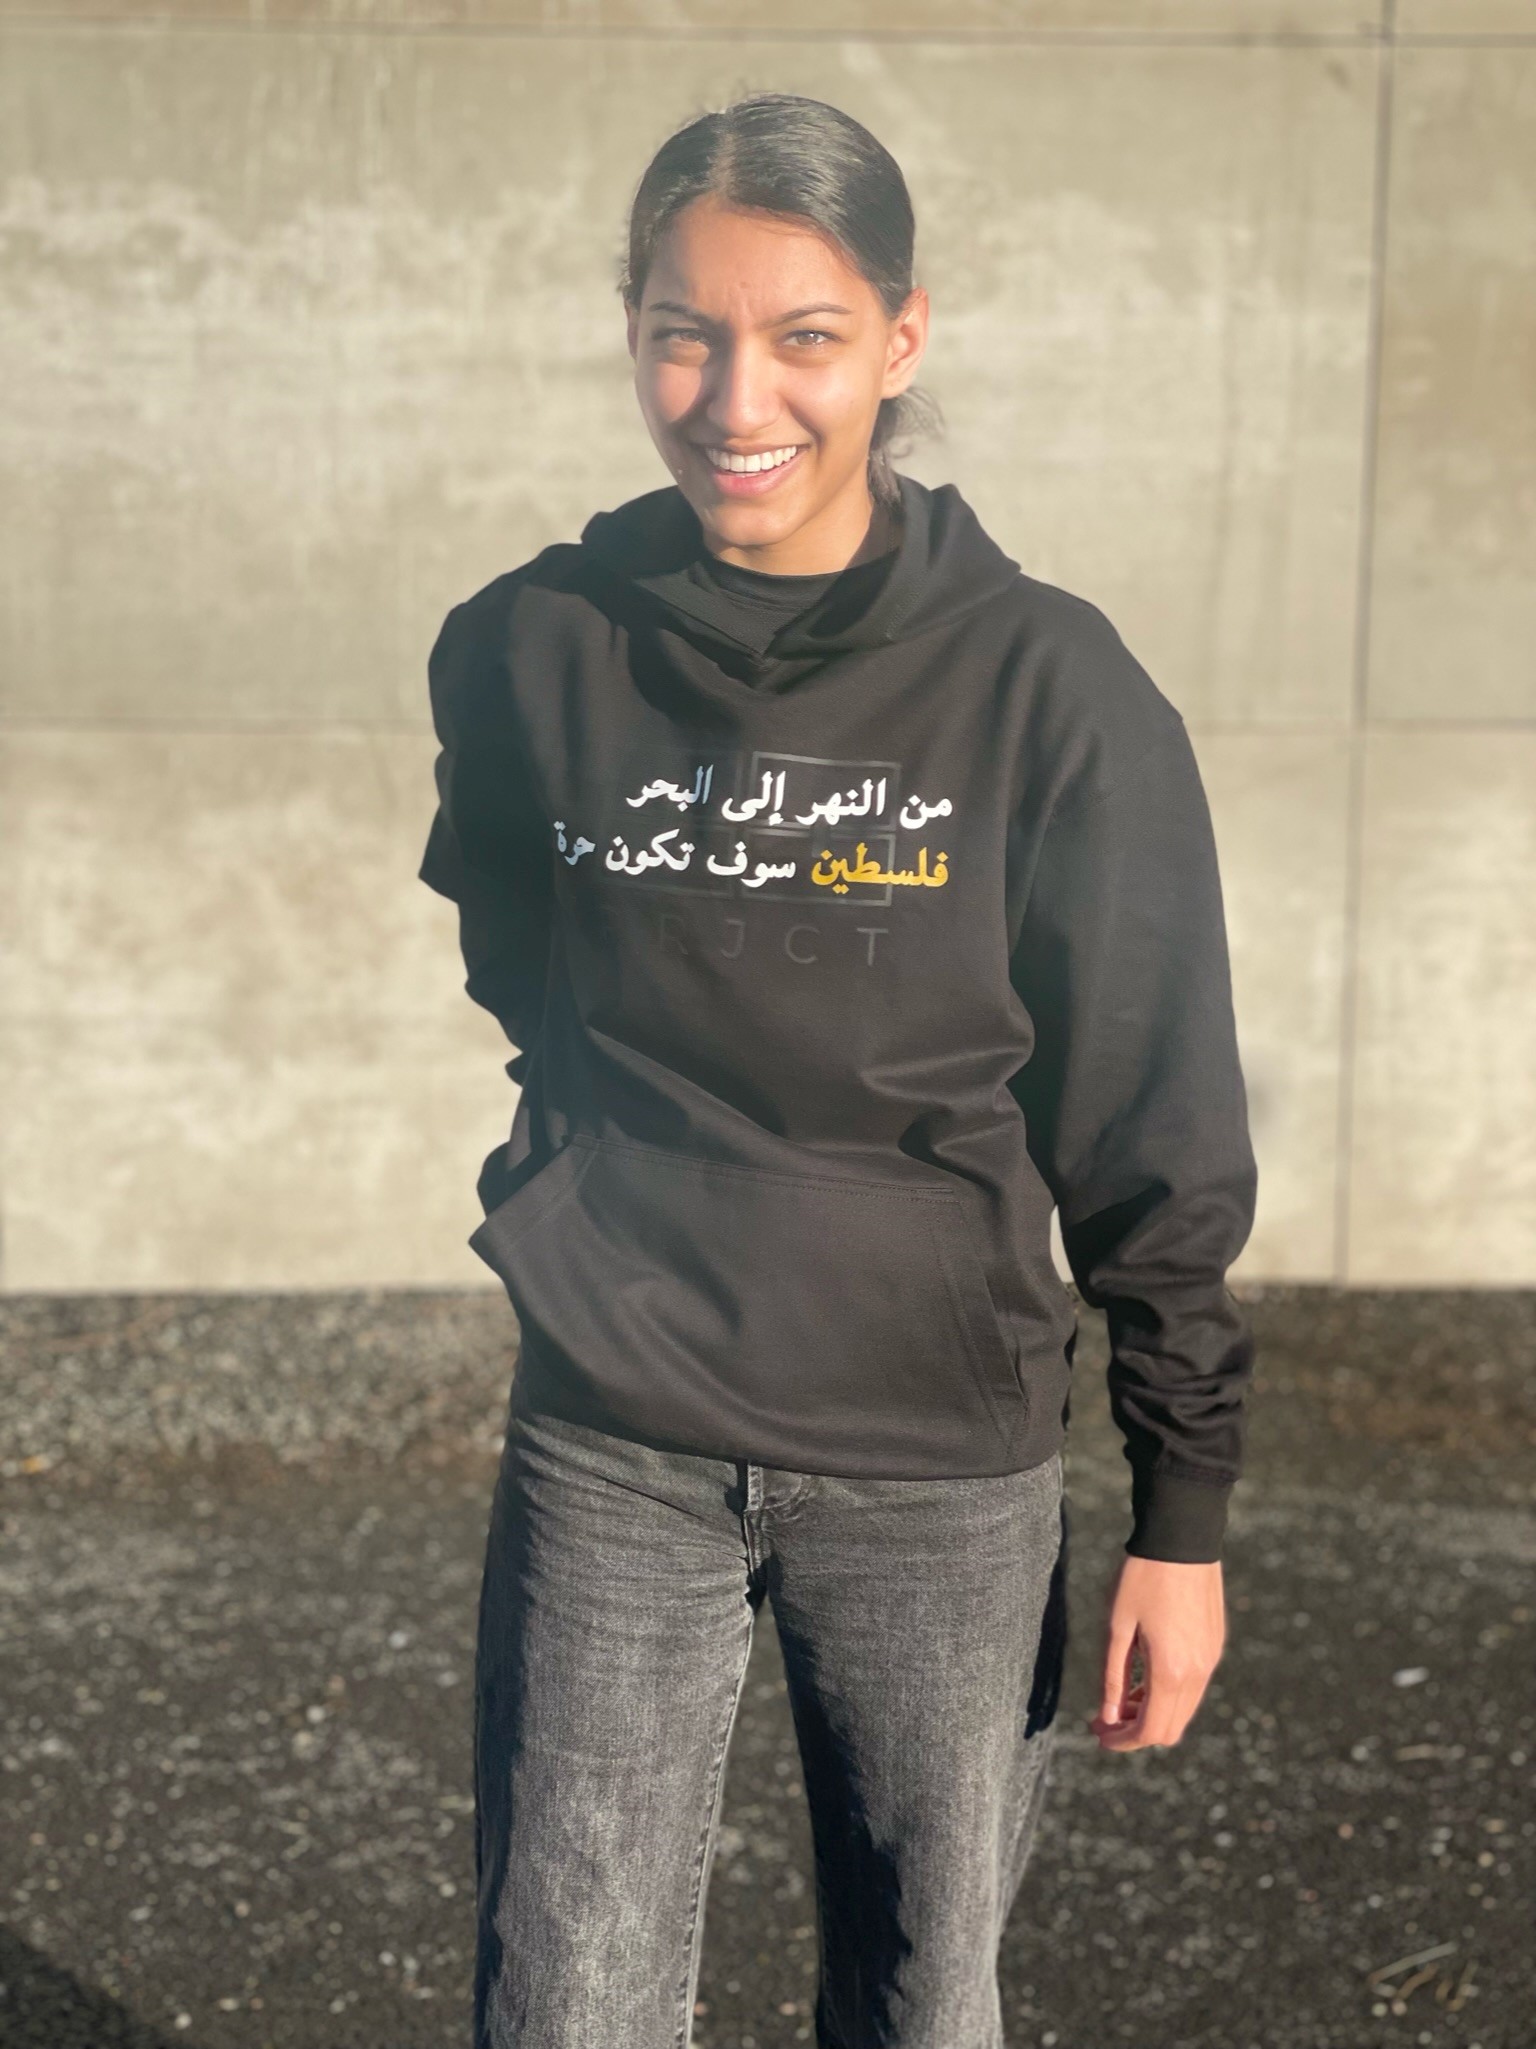 ?FROM THE RIVER TO THE SEA PALESTINE WILL BE FREE` HOODIE - BLACK (LIMITED EDITION)